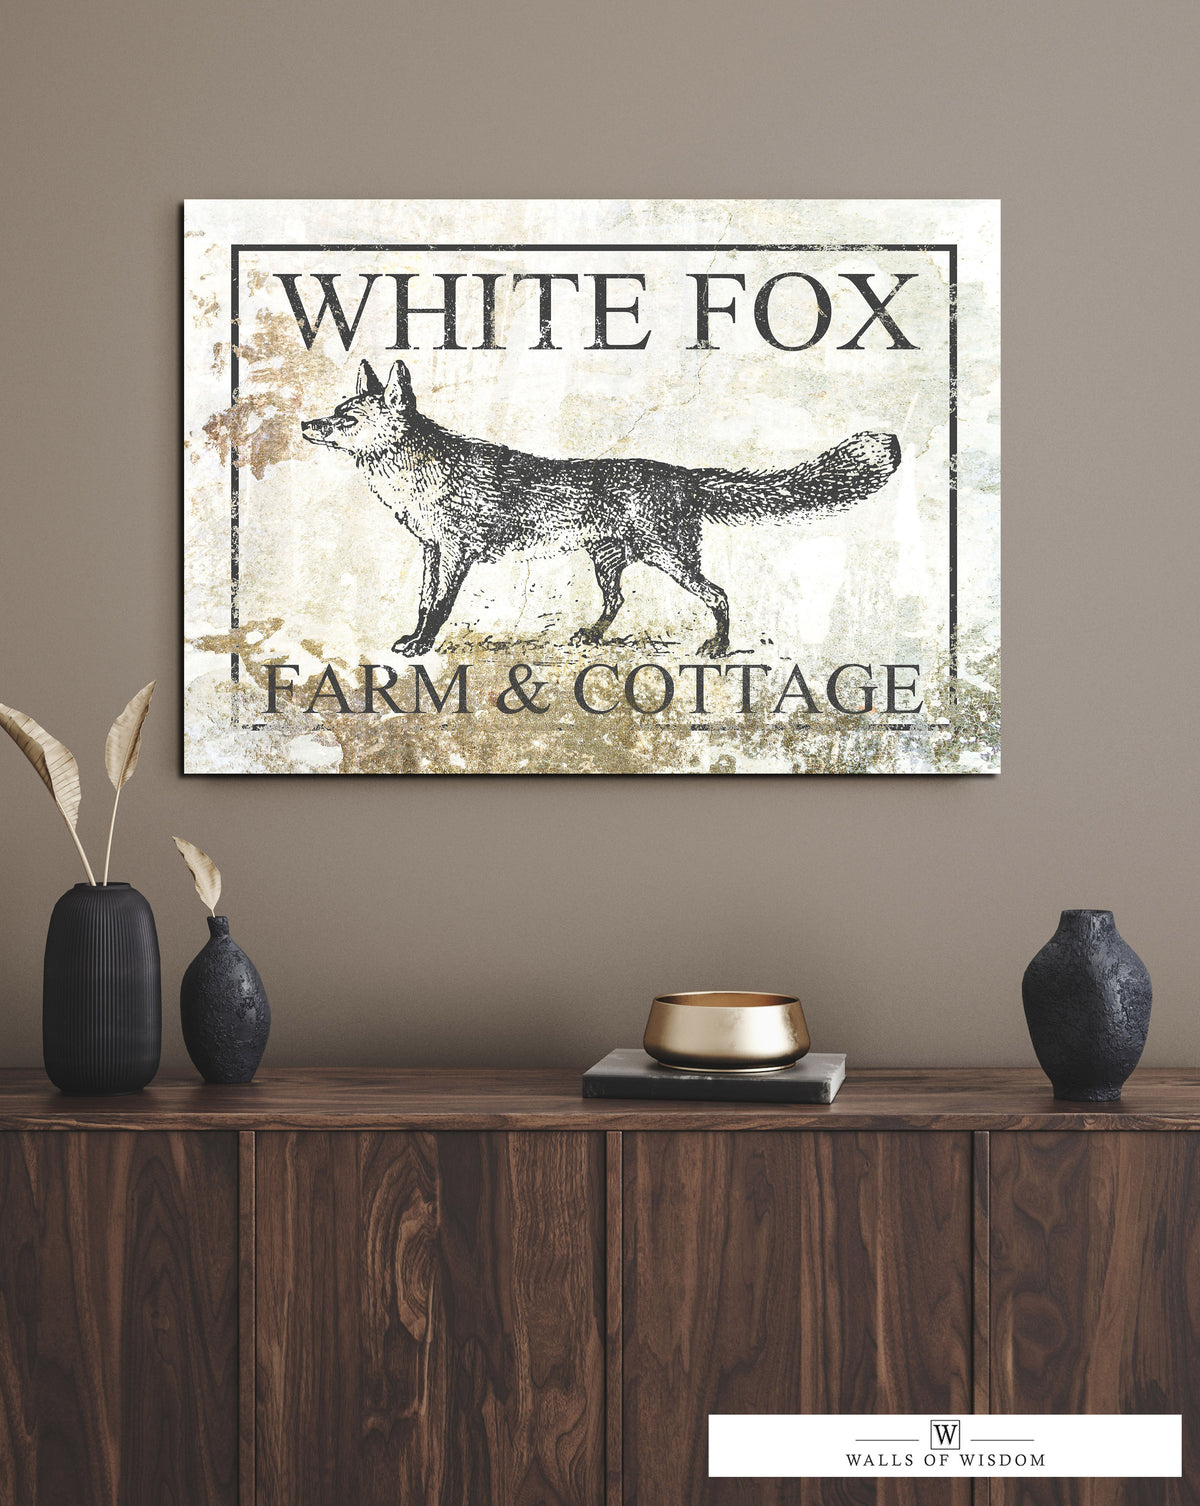 White Fox Farm and Cottage Weathered Canvas Wall Decor -  Rustic Cottagecore Living Room Art